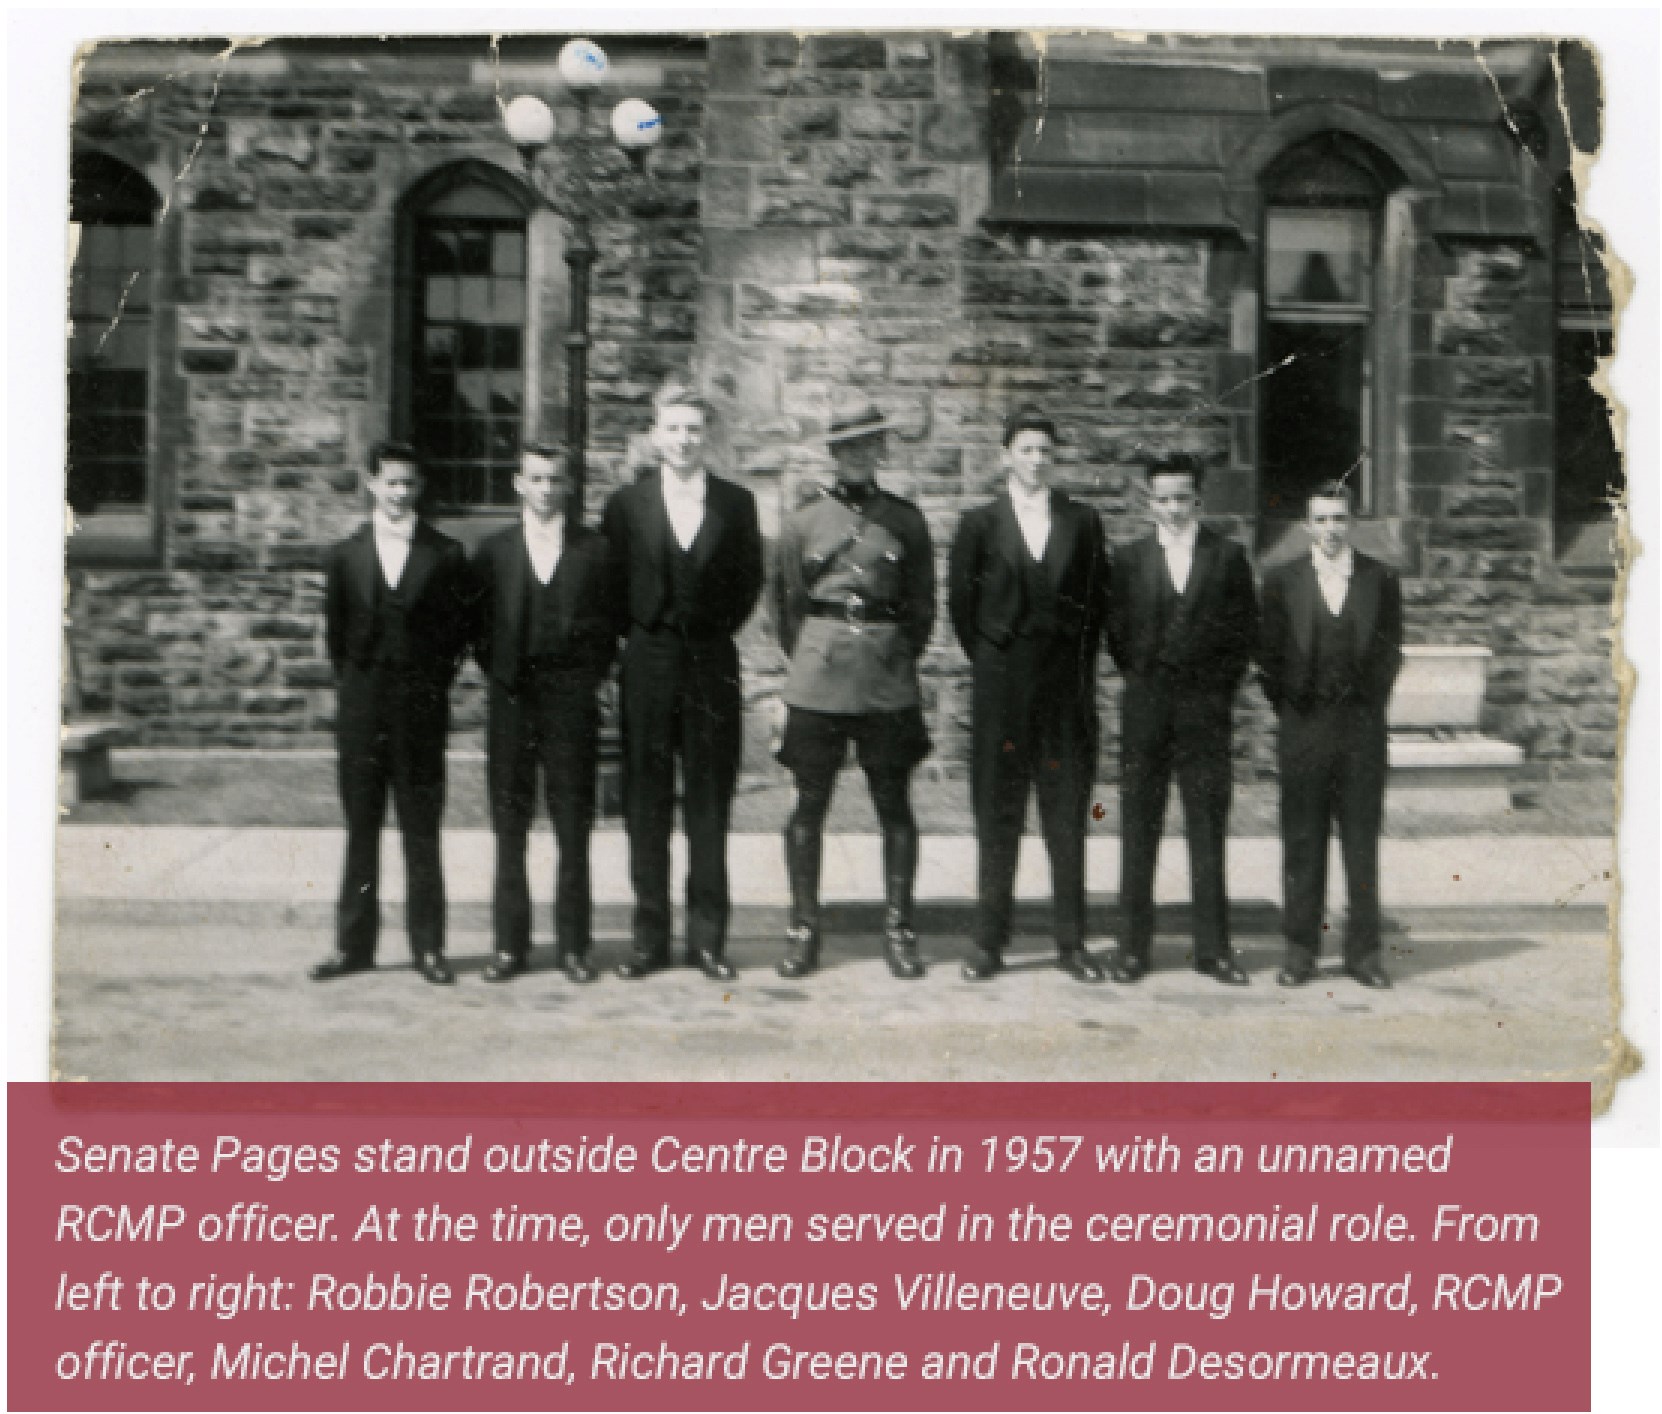 Senate Pages stand outside Centre Block in 1957 with an unnamed RCMP officer. At the time, only men served in the ceremonial role. From left to right: Robbie Robertson, Jacques Villeneuve, Doug Howard, RCMP officer, Michel Chartrand, Richard Greene and Ronald Desormeaux.